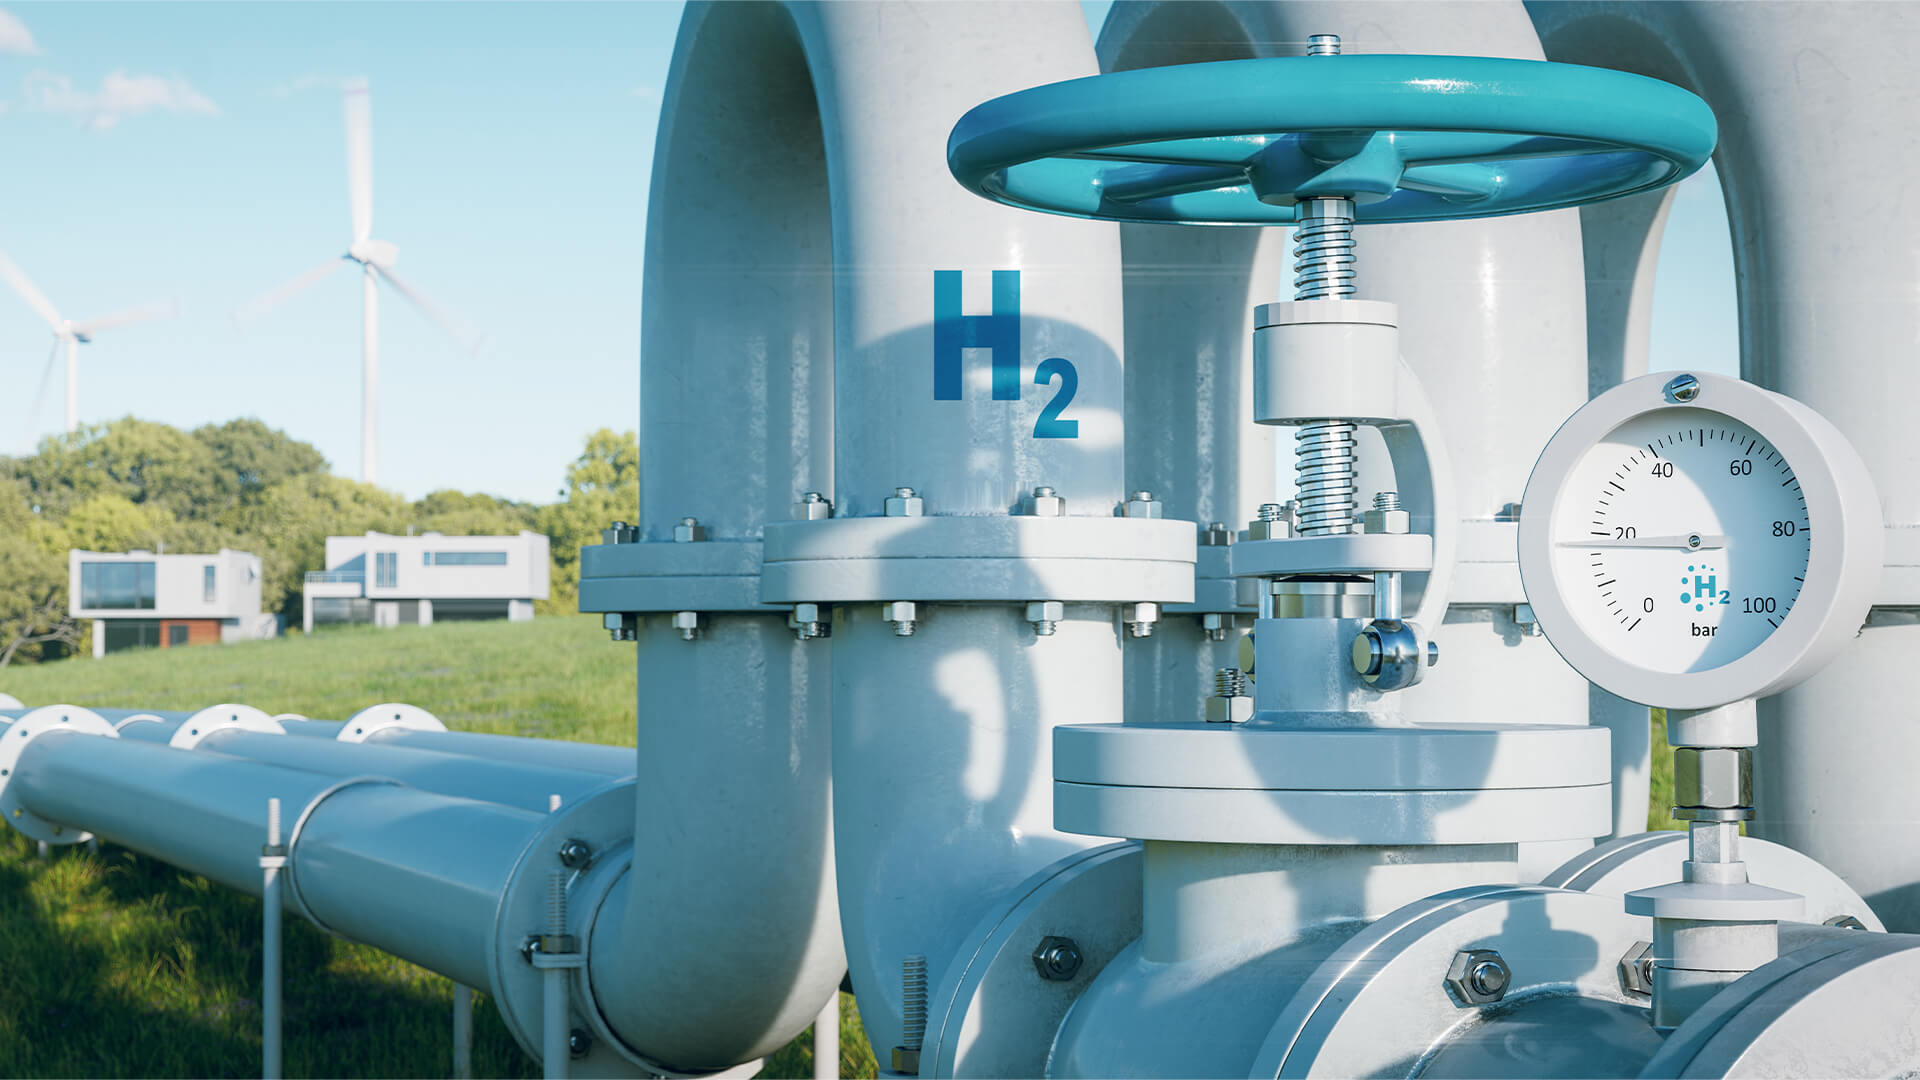 A hydrogen pipeline to houses illustrating the transformation of the energy sector towards clean, carbon-neutral, safe and independent energy sources